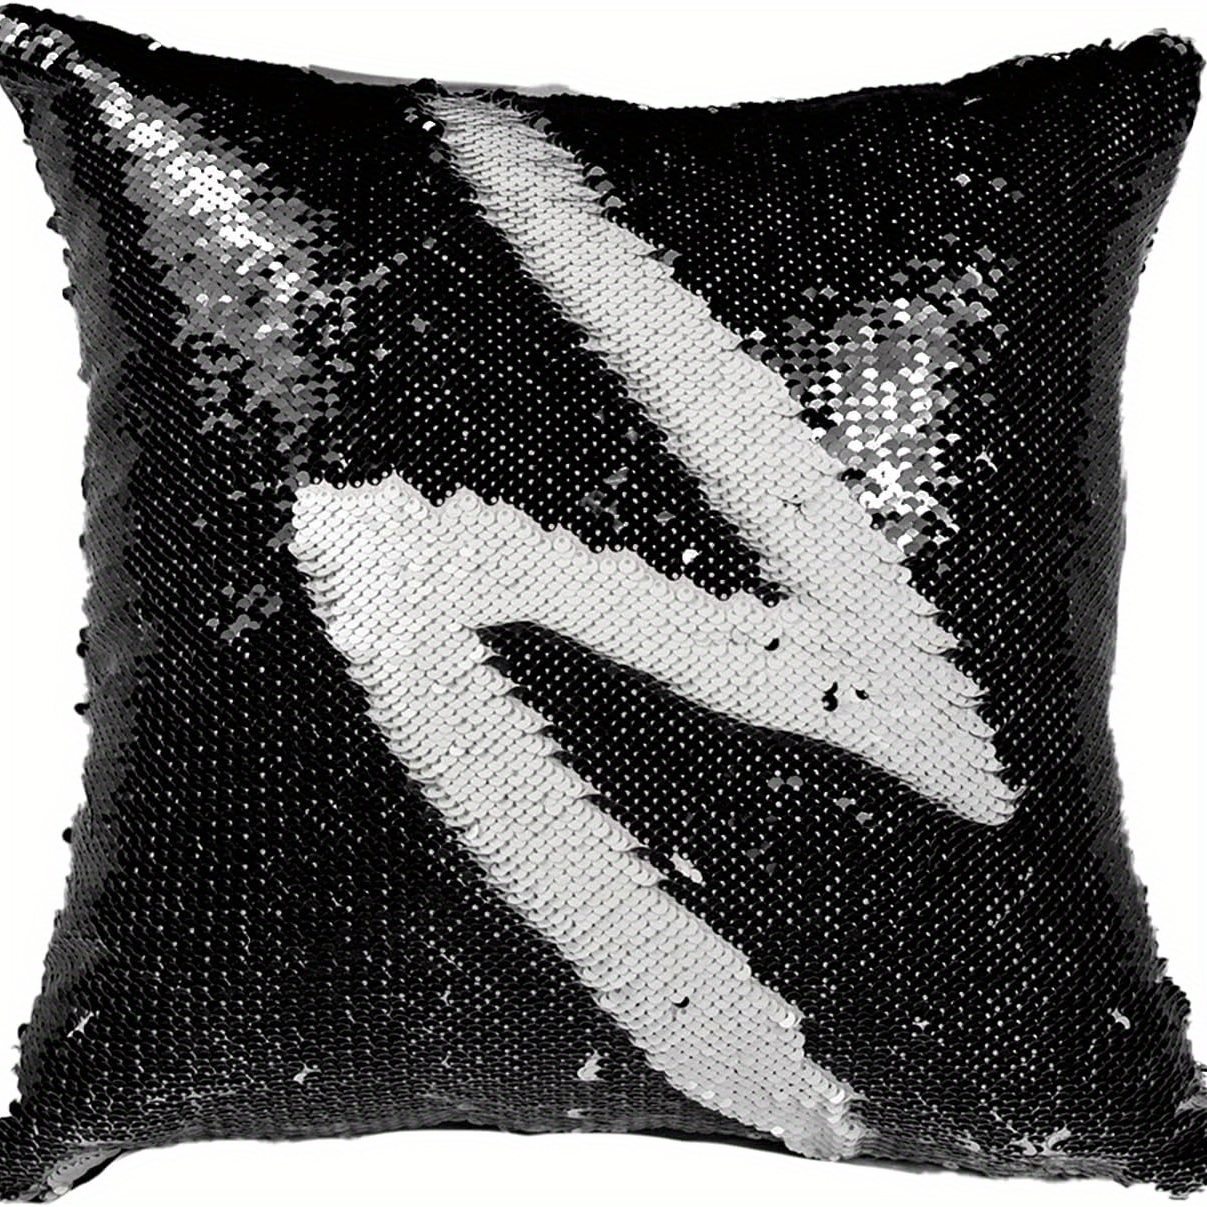 Reversible Sequin Sublimation Pillow Case 16 x 16 - Silver and White